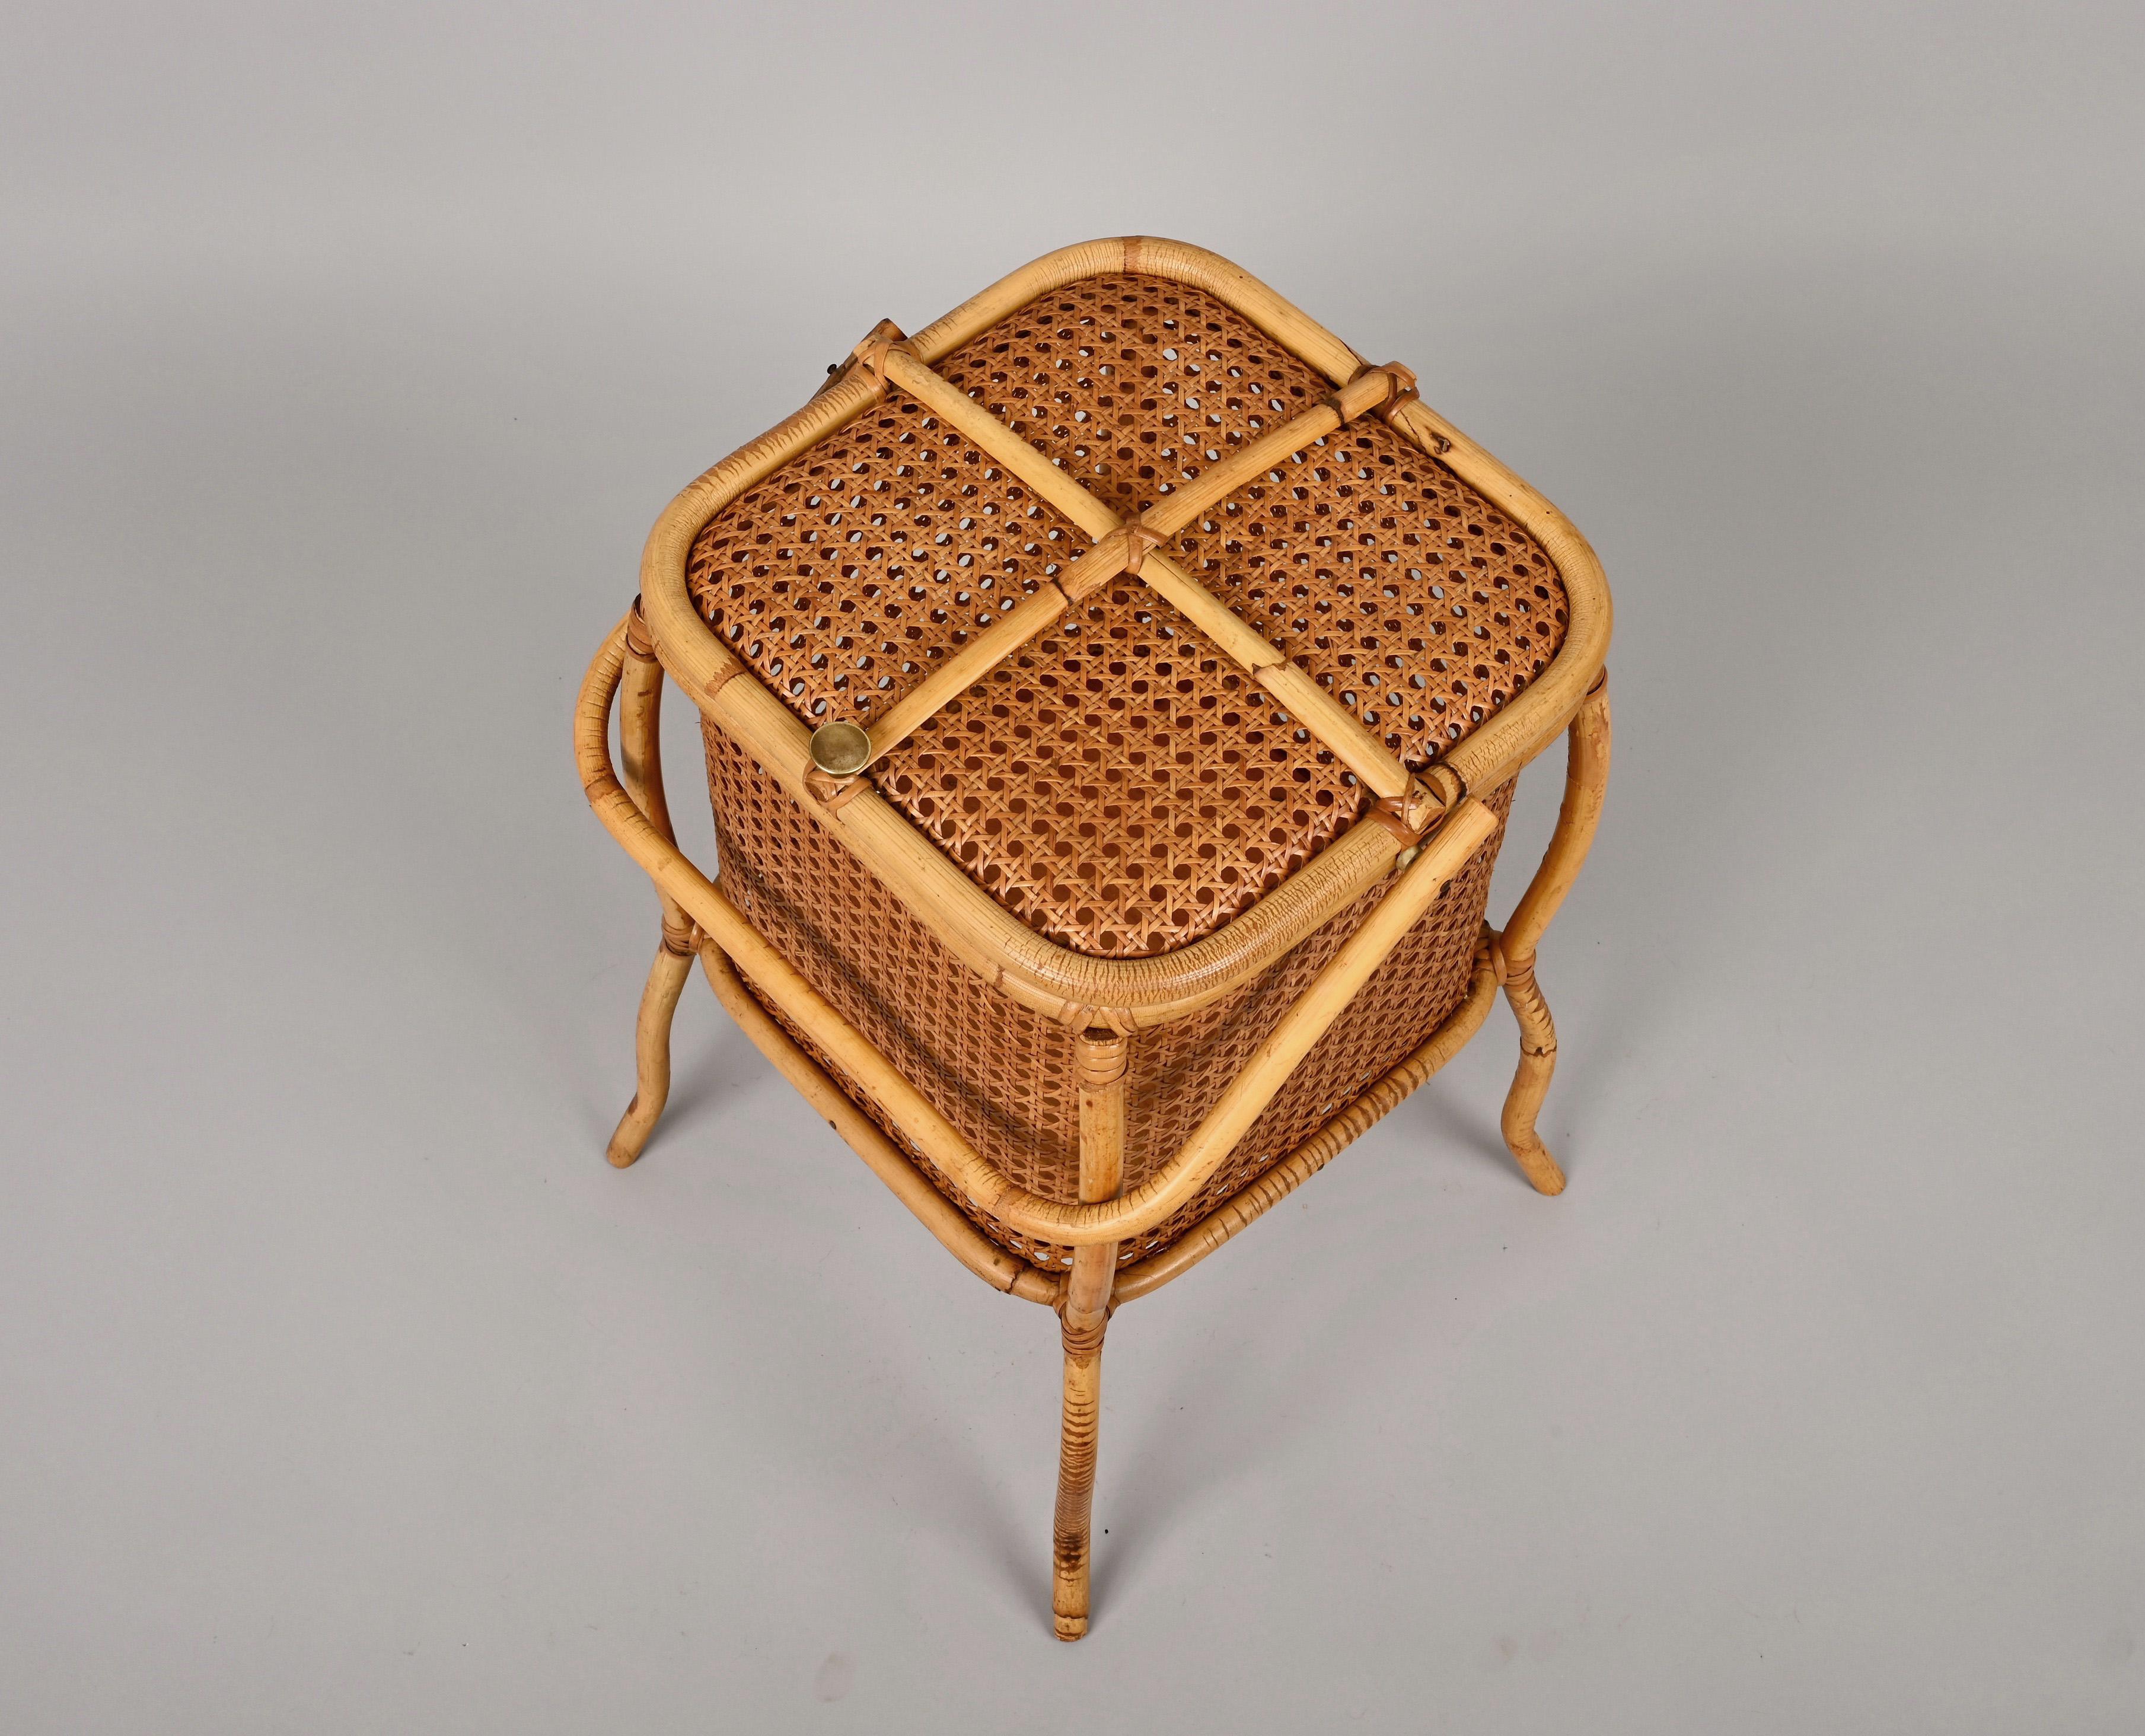 Midcentury Bamboo, Wicker and Vienna Straw Cubic Italian Magazine Basket, 1960s For Sale 7